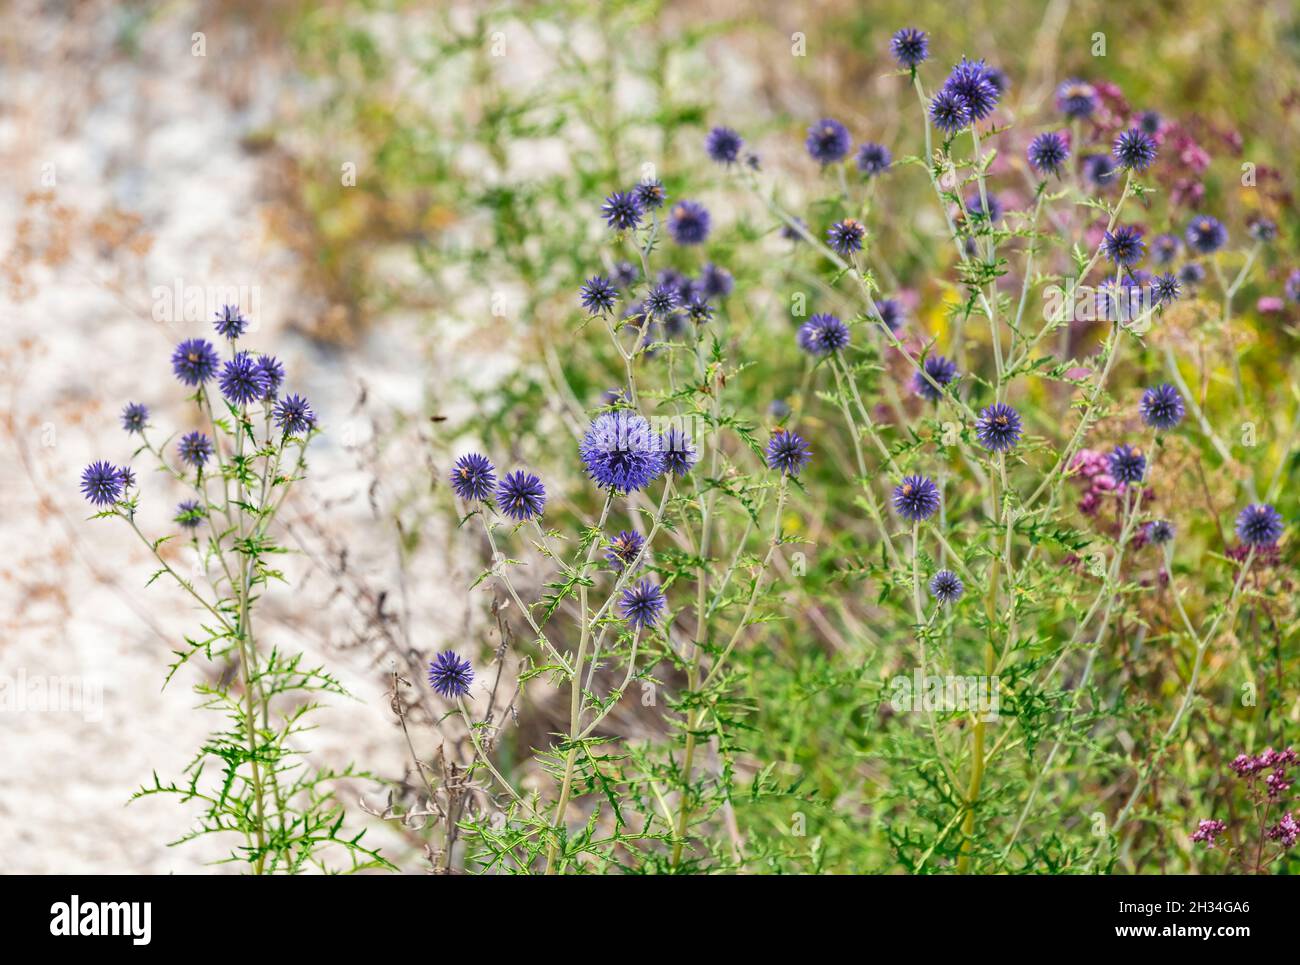 Blue balls flowers of Echinops ritro known as southern globethistle in Ukraine Stock Photo